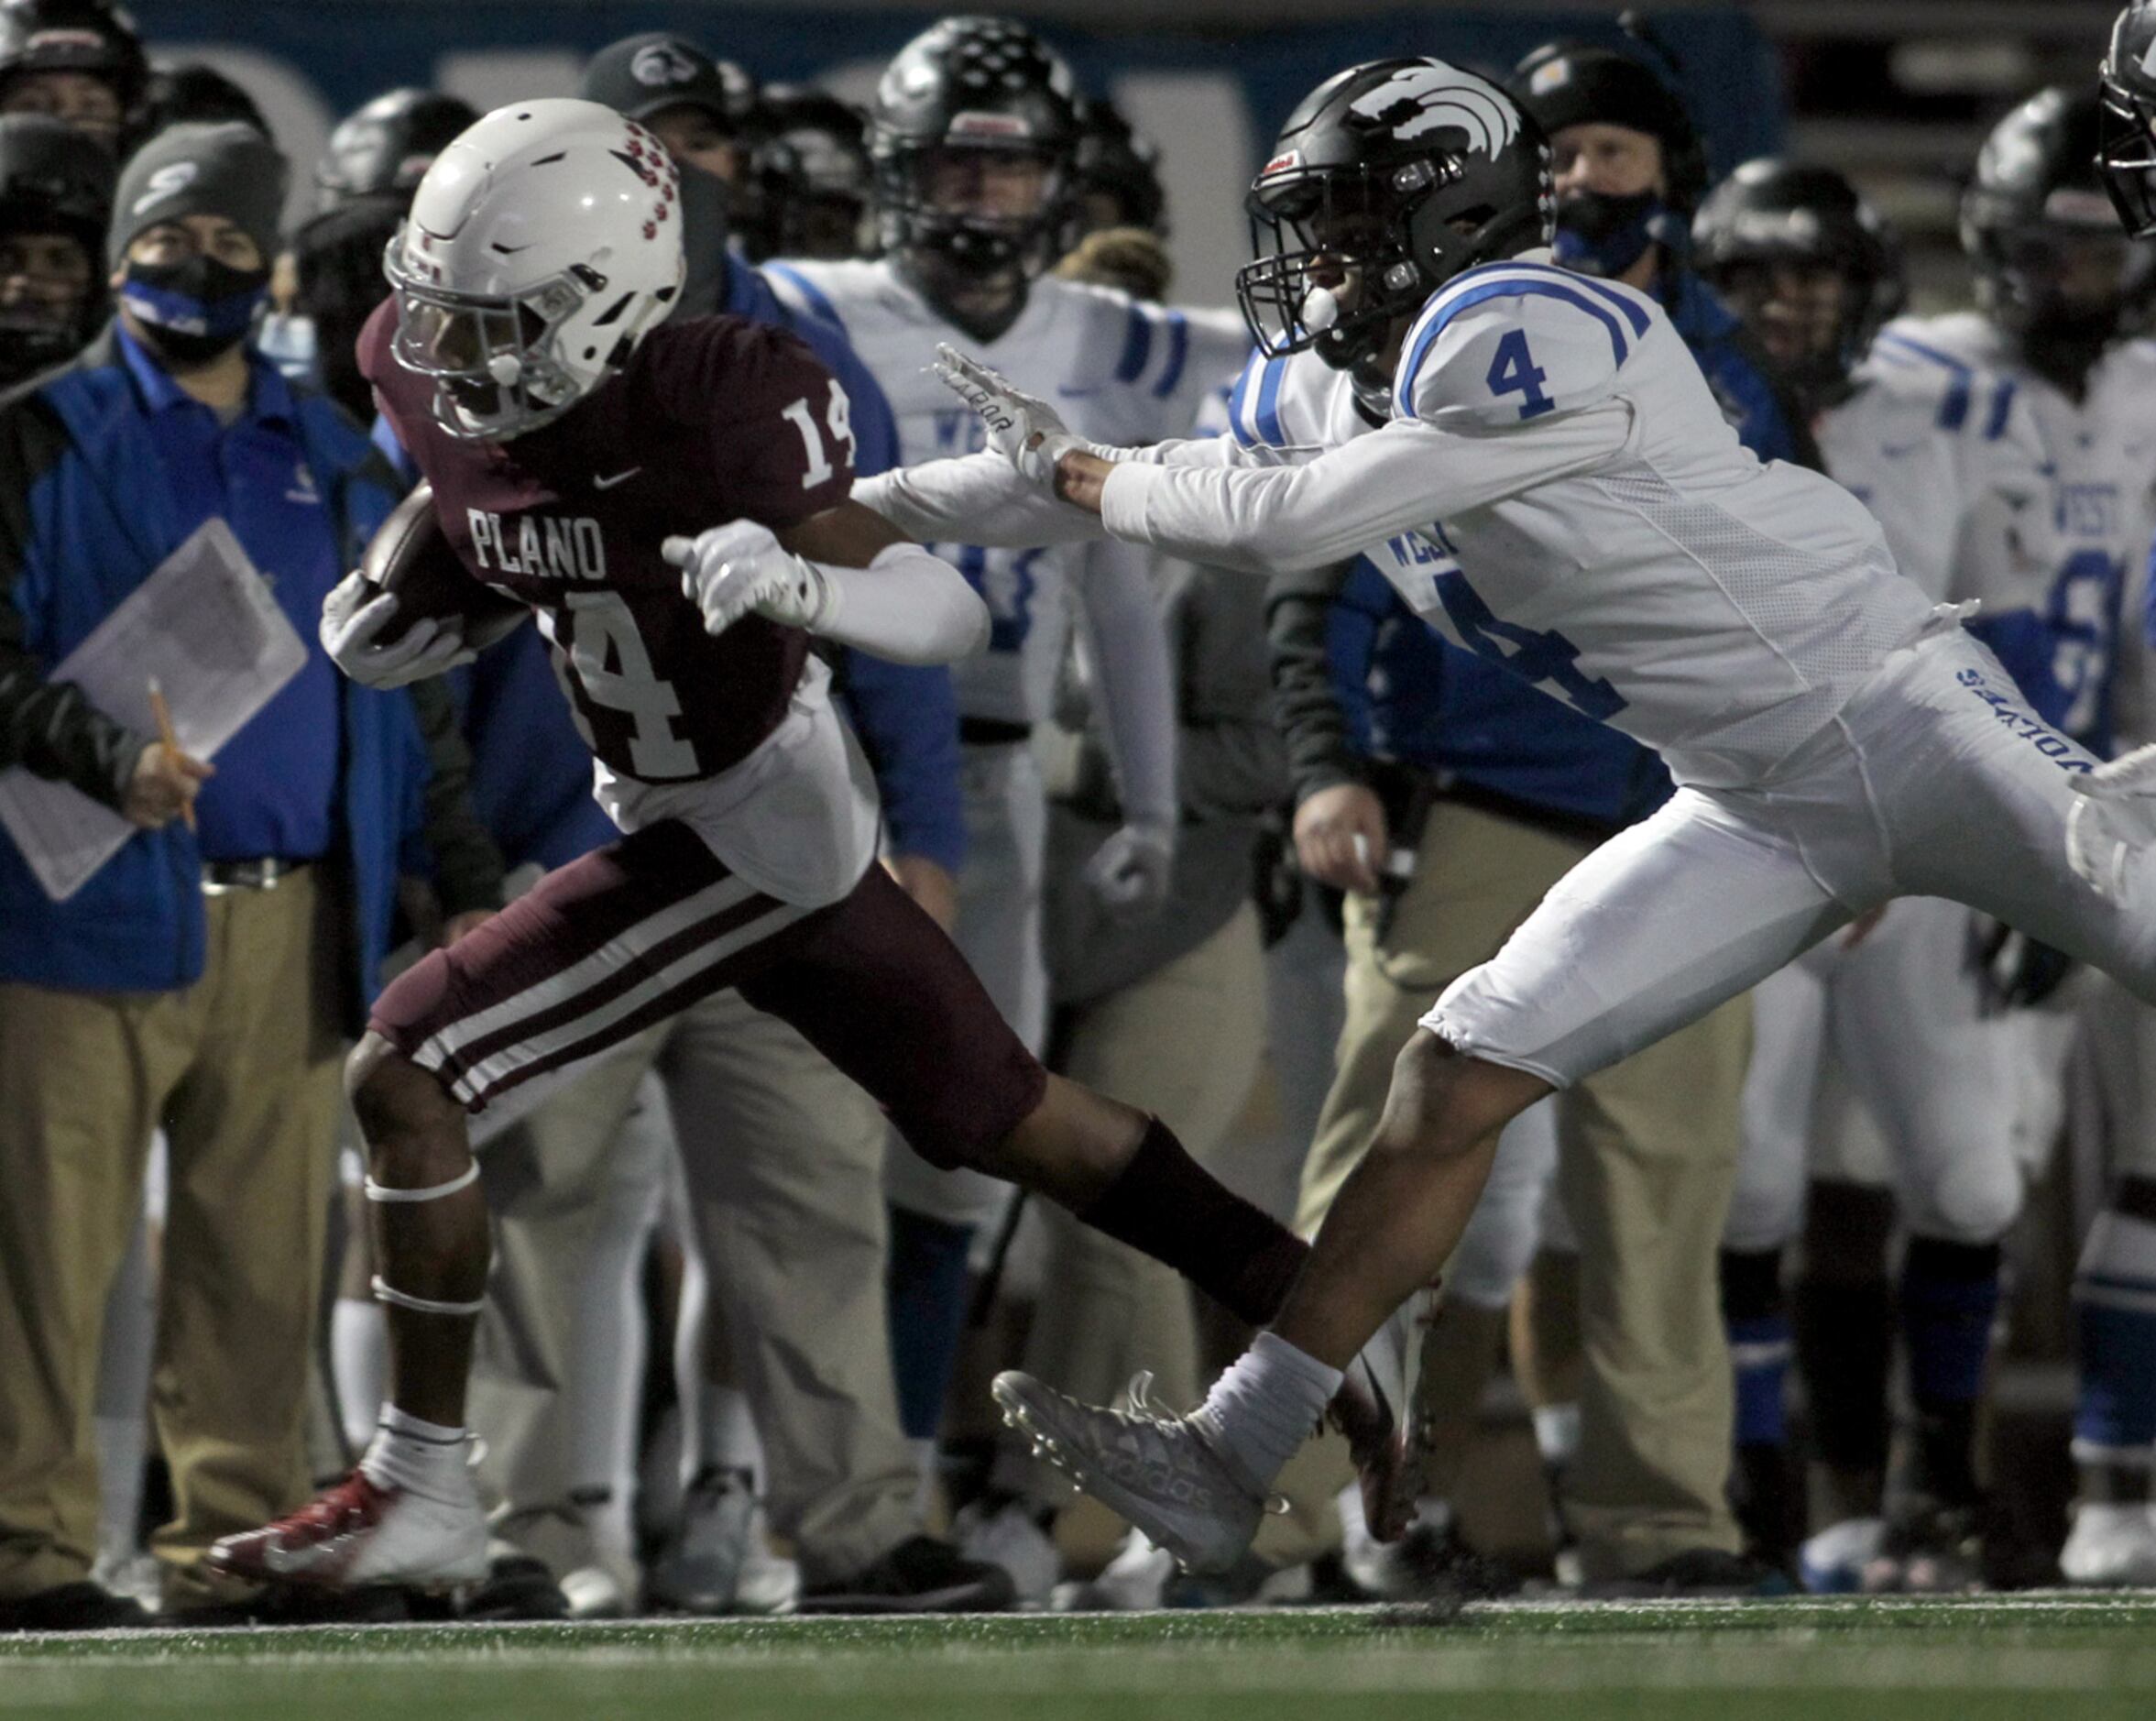 Plano receiver Khamare Spivery (14) is shoved out of bounds by Plano West defensive back...